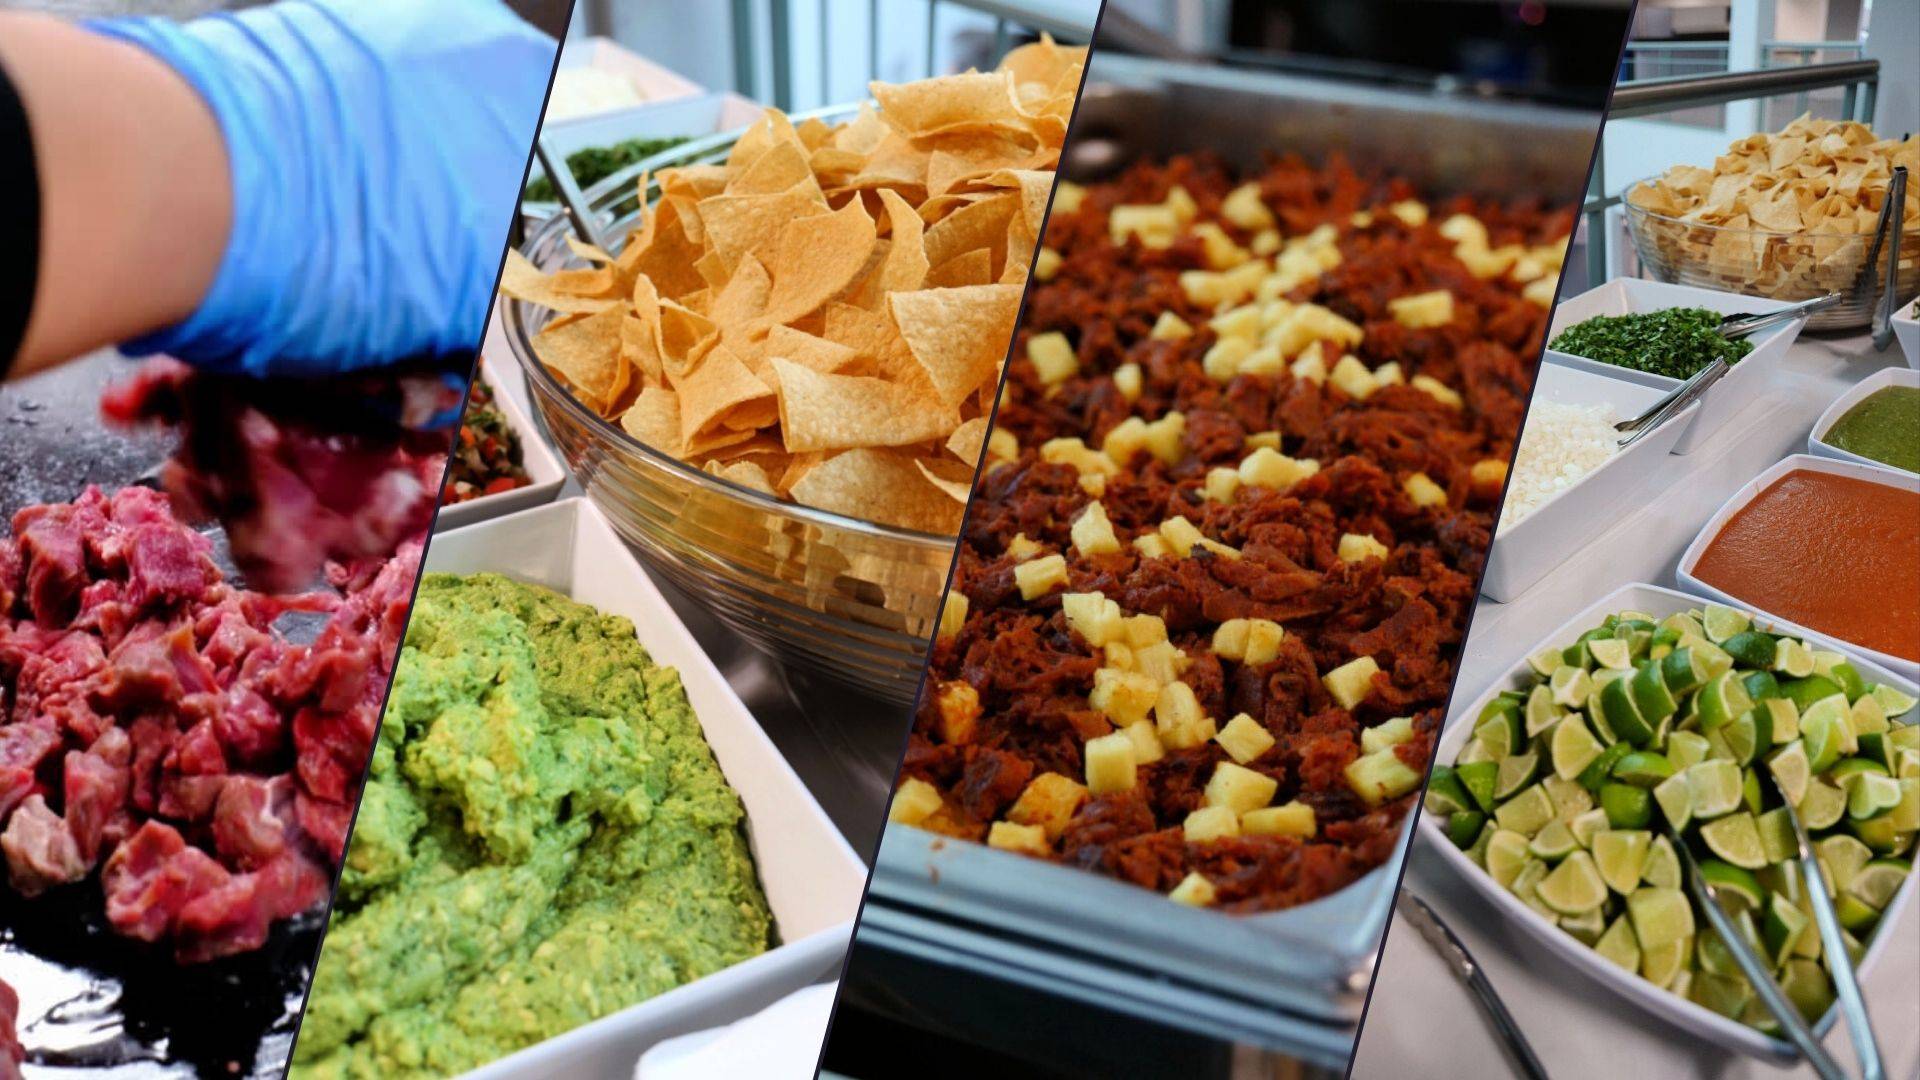 Pick Up a Build-Your-Own Taco Bar for Your Next Event from Taqueria Puebla in Mukilteo